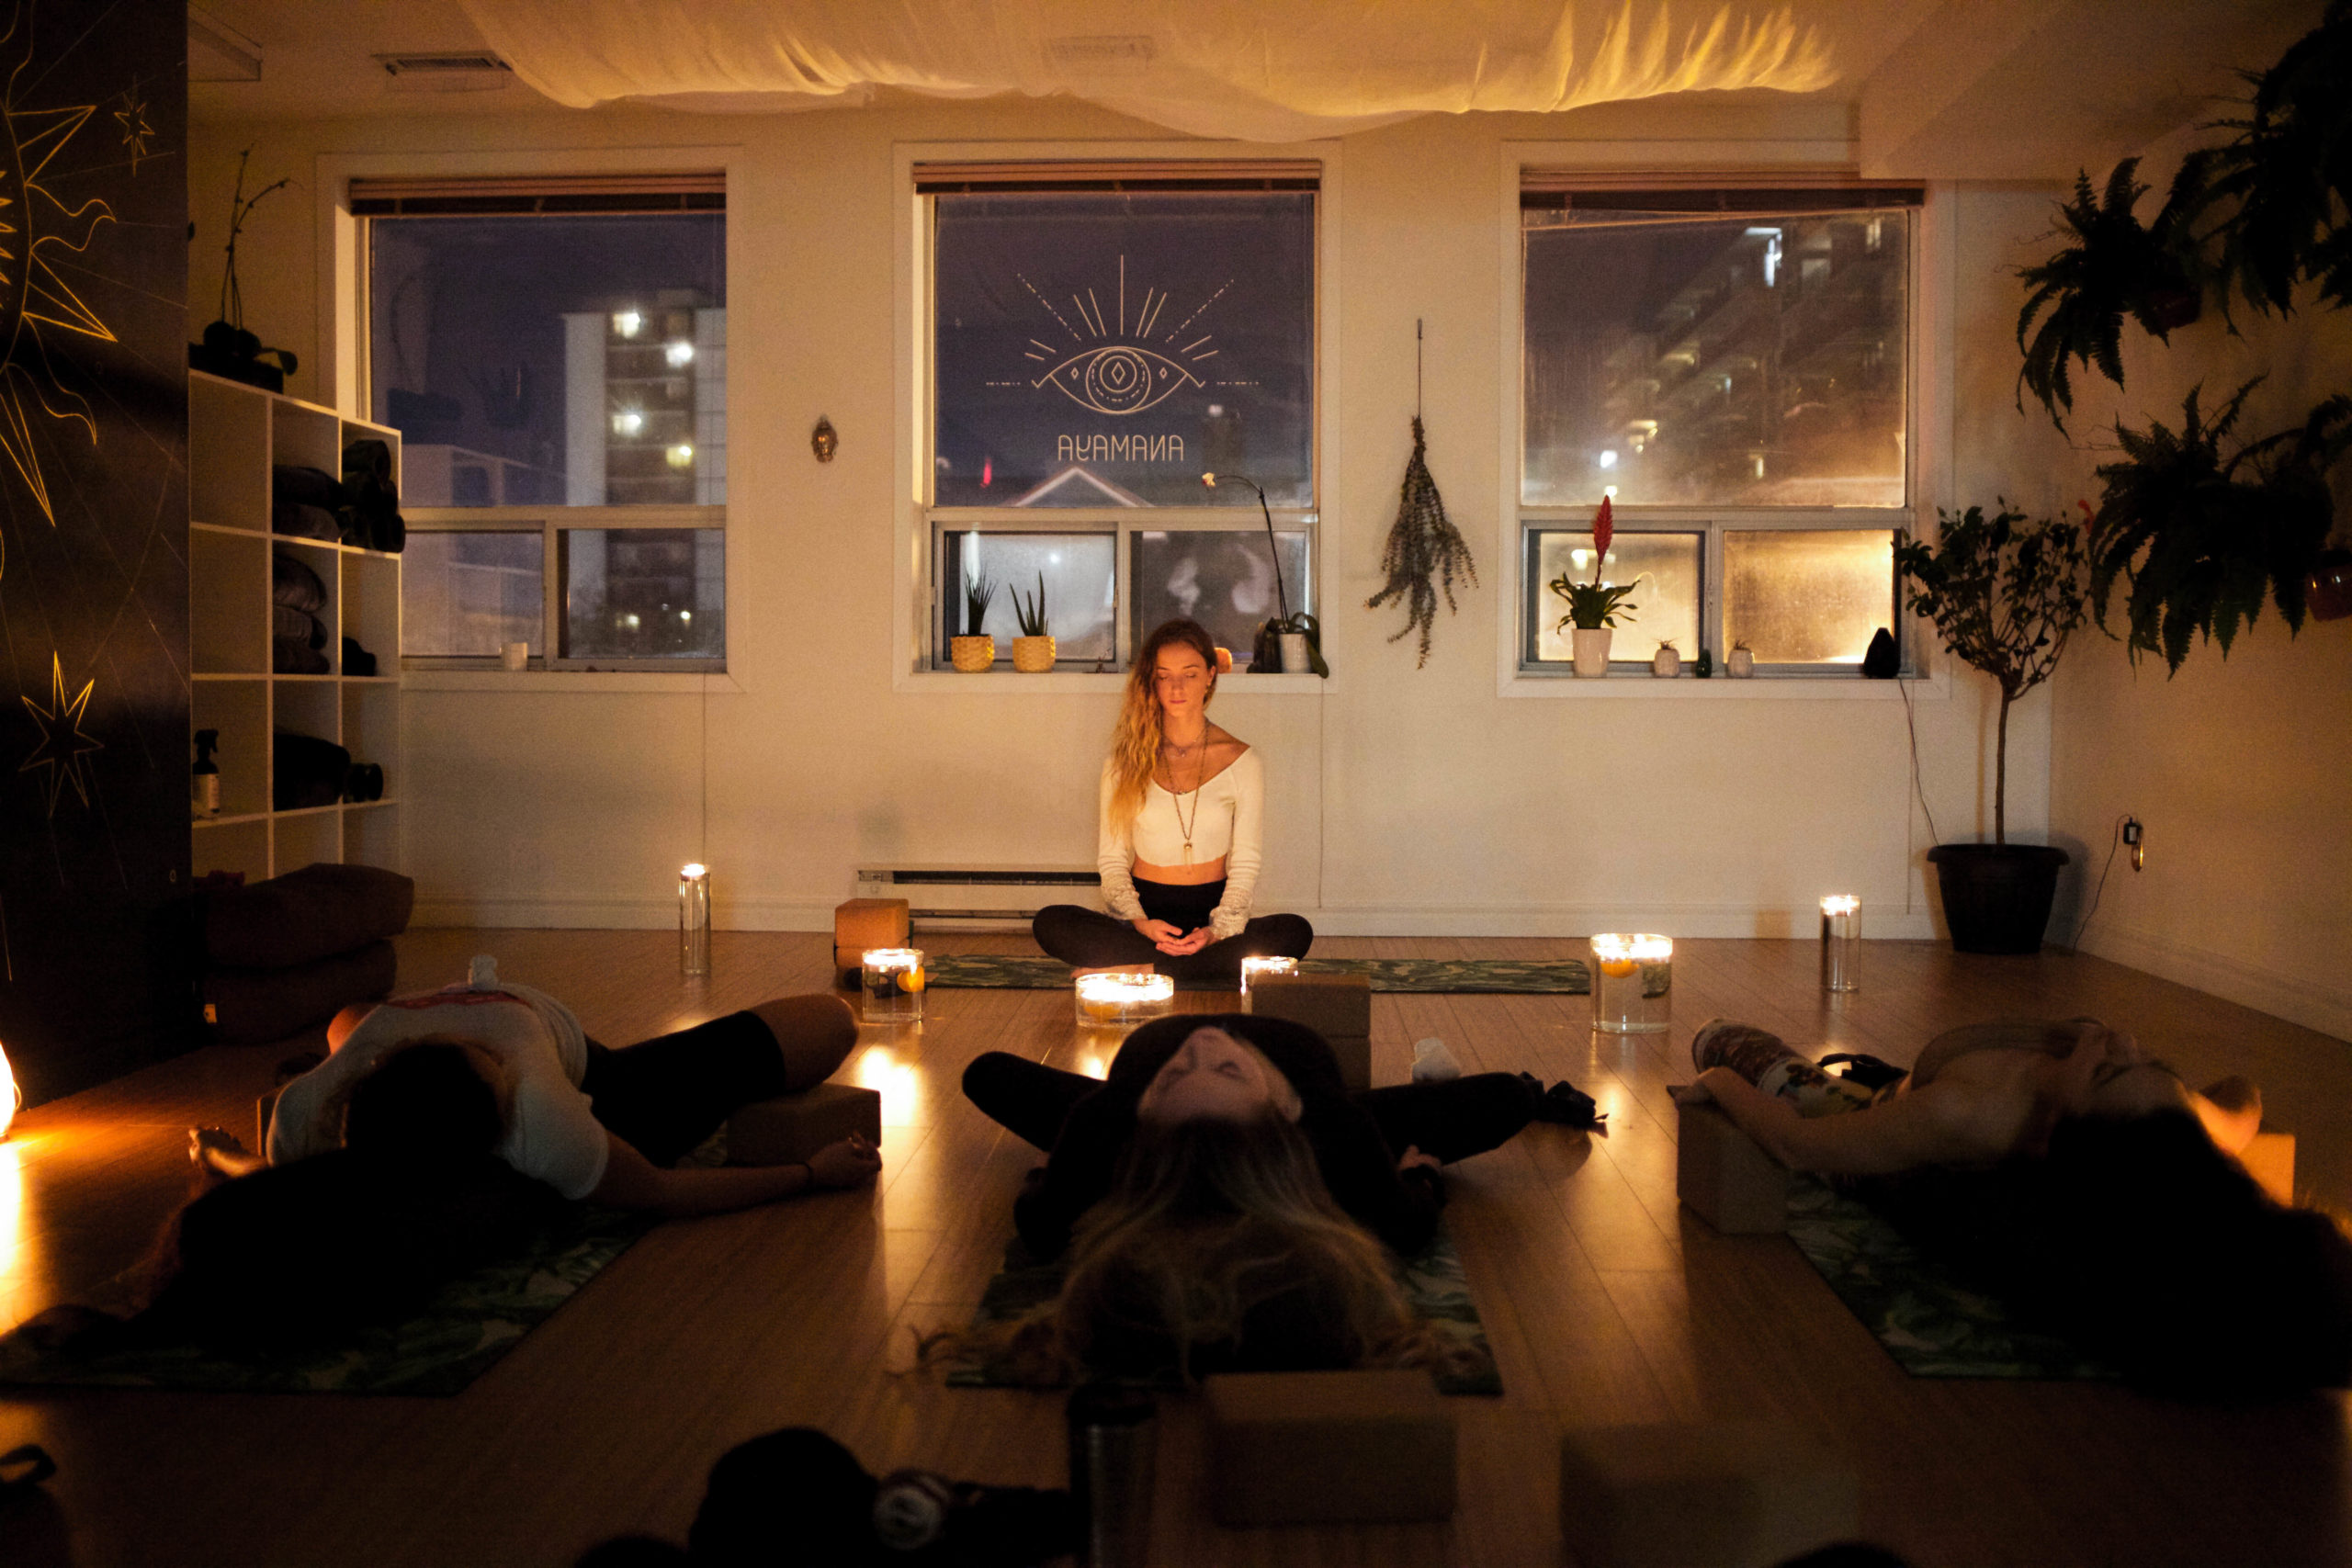 Anja leading a class in her new place as a yoga studio owner